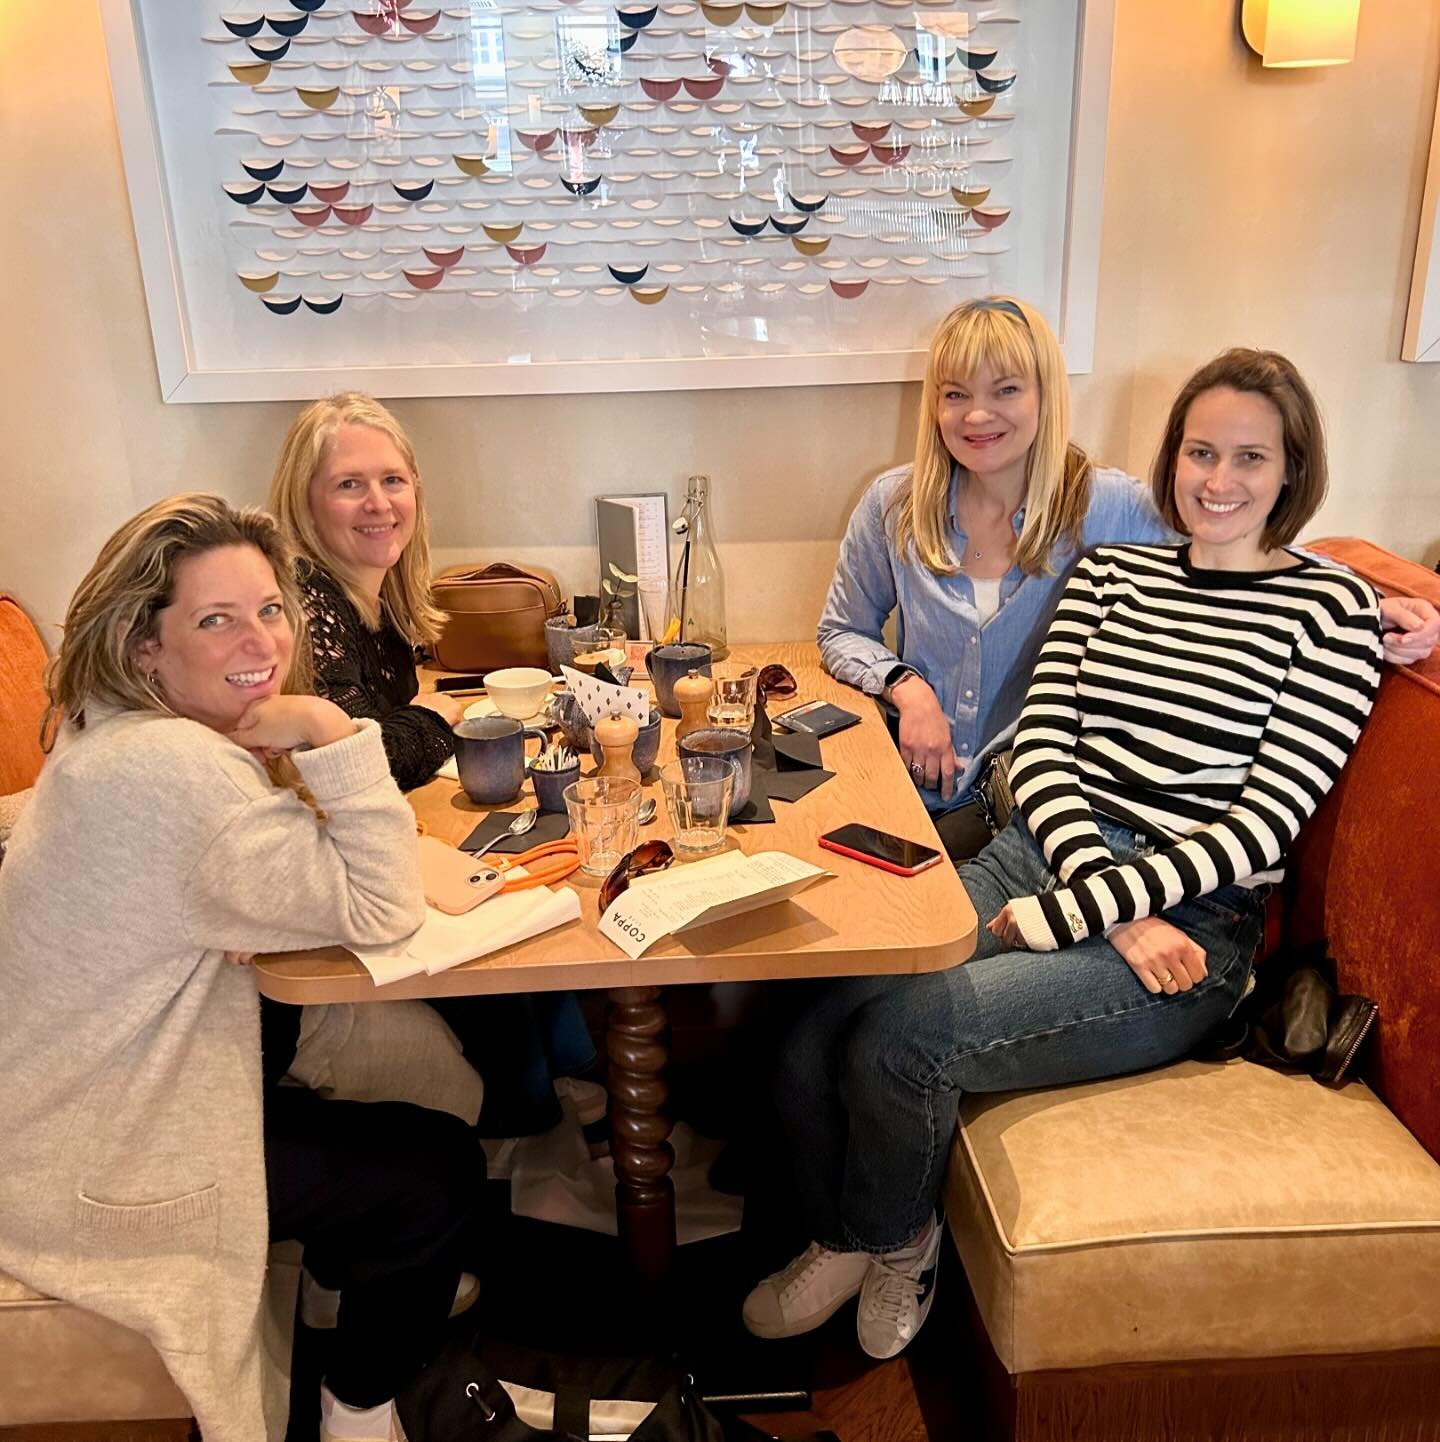 April photo dump! What a mixed bag this month was&hellip; 

Highlights: lovely brunch with lovely writers, the most amazing cocktails with @rebeccafleetwriter and the start of our kitchen transformation 🤗

Not exactly a highlight but an explanation 